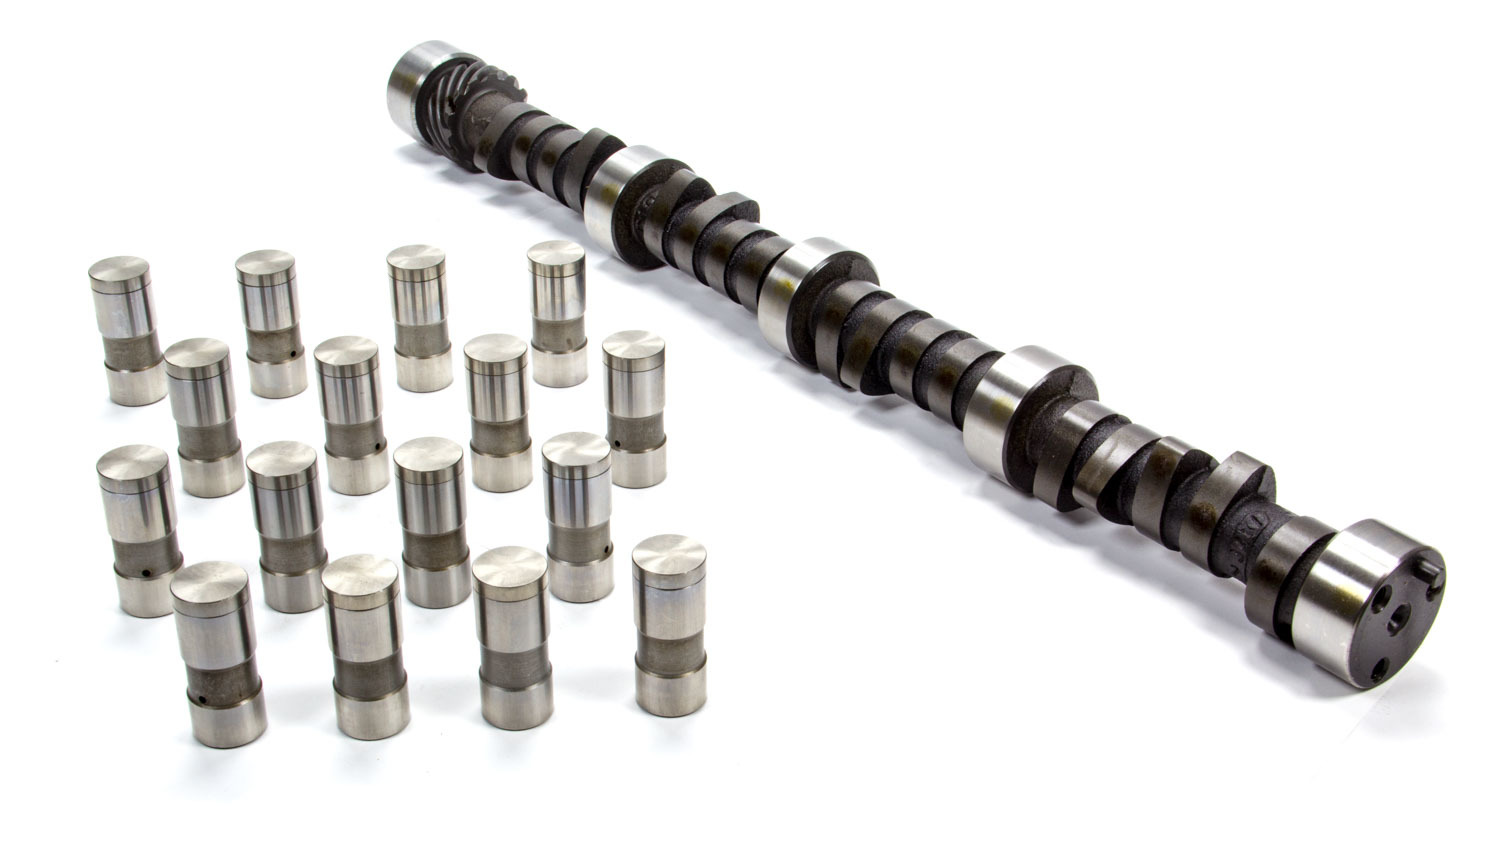 Elgin CL-1785PK Camshaft / Lifters, Street Performance, Hydraulic Flat Tappet, Lift 0.450 / 0.450 in, Duration 274 / 274, 110 LSA, 2000 / 4800 RPM, Small Block Chevy, Kit